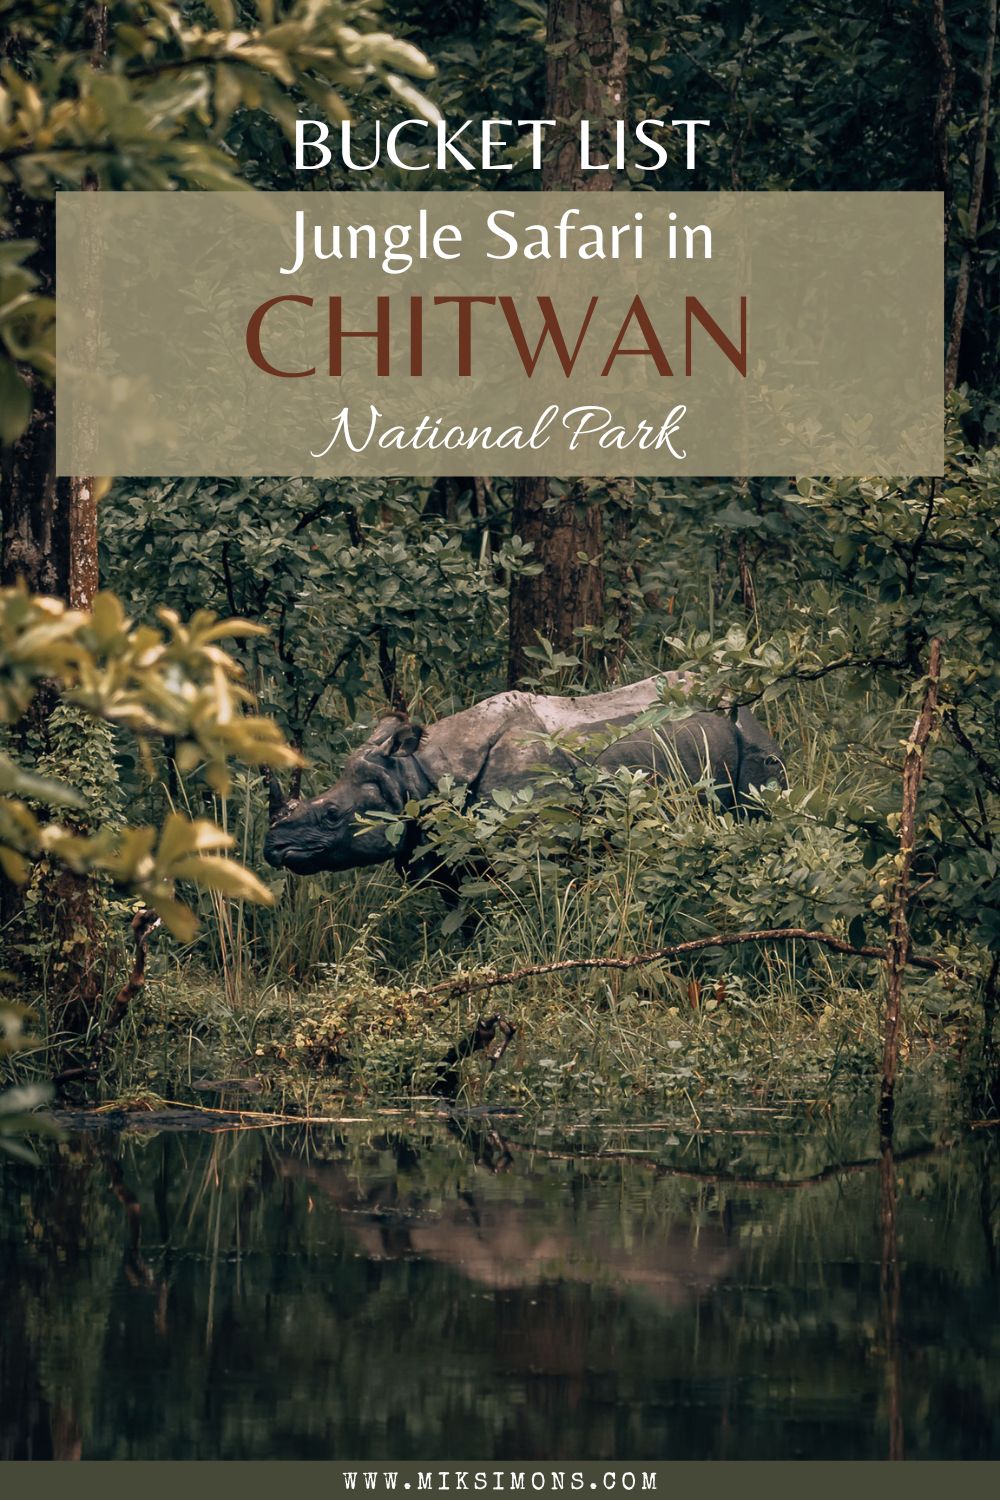 A jungle safari in Chitwan National Park - 6 awesome reasons to add this to your bucket list